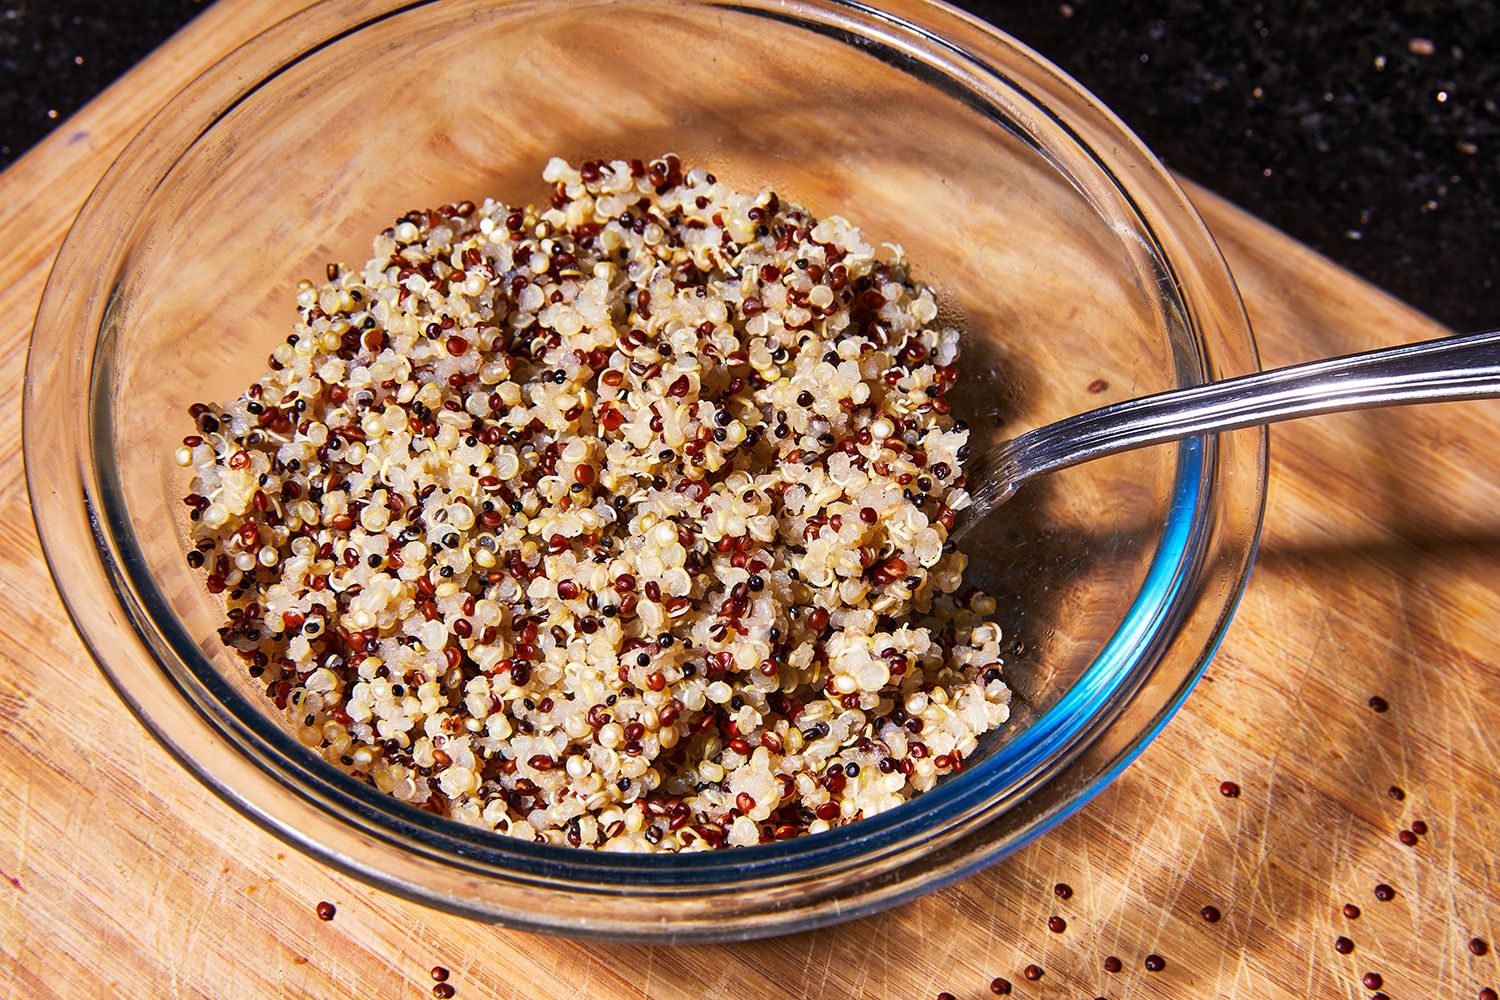 Quinoa: Nutrition Facts, Health Benefits, Types, and More